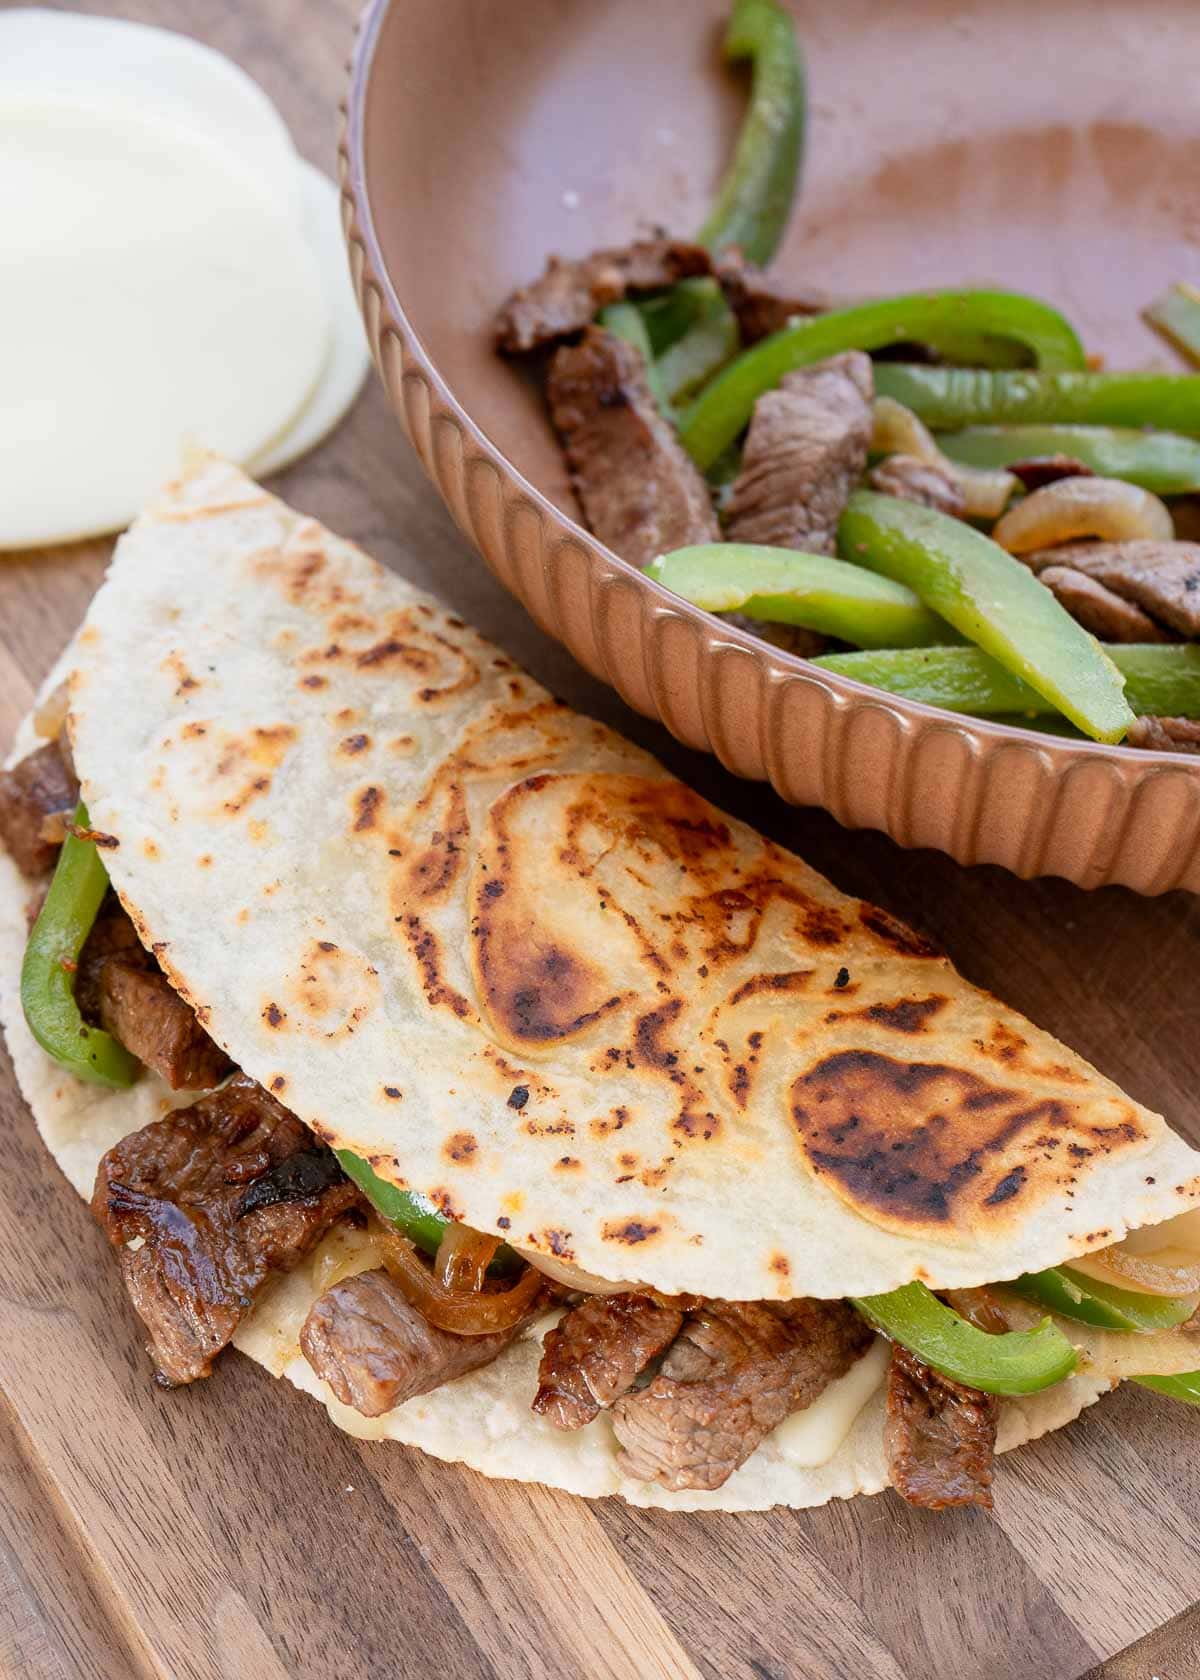 juicy steak, onions, and peppers in a fried quesadilla